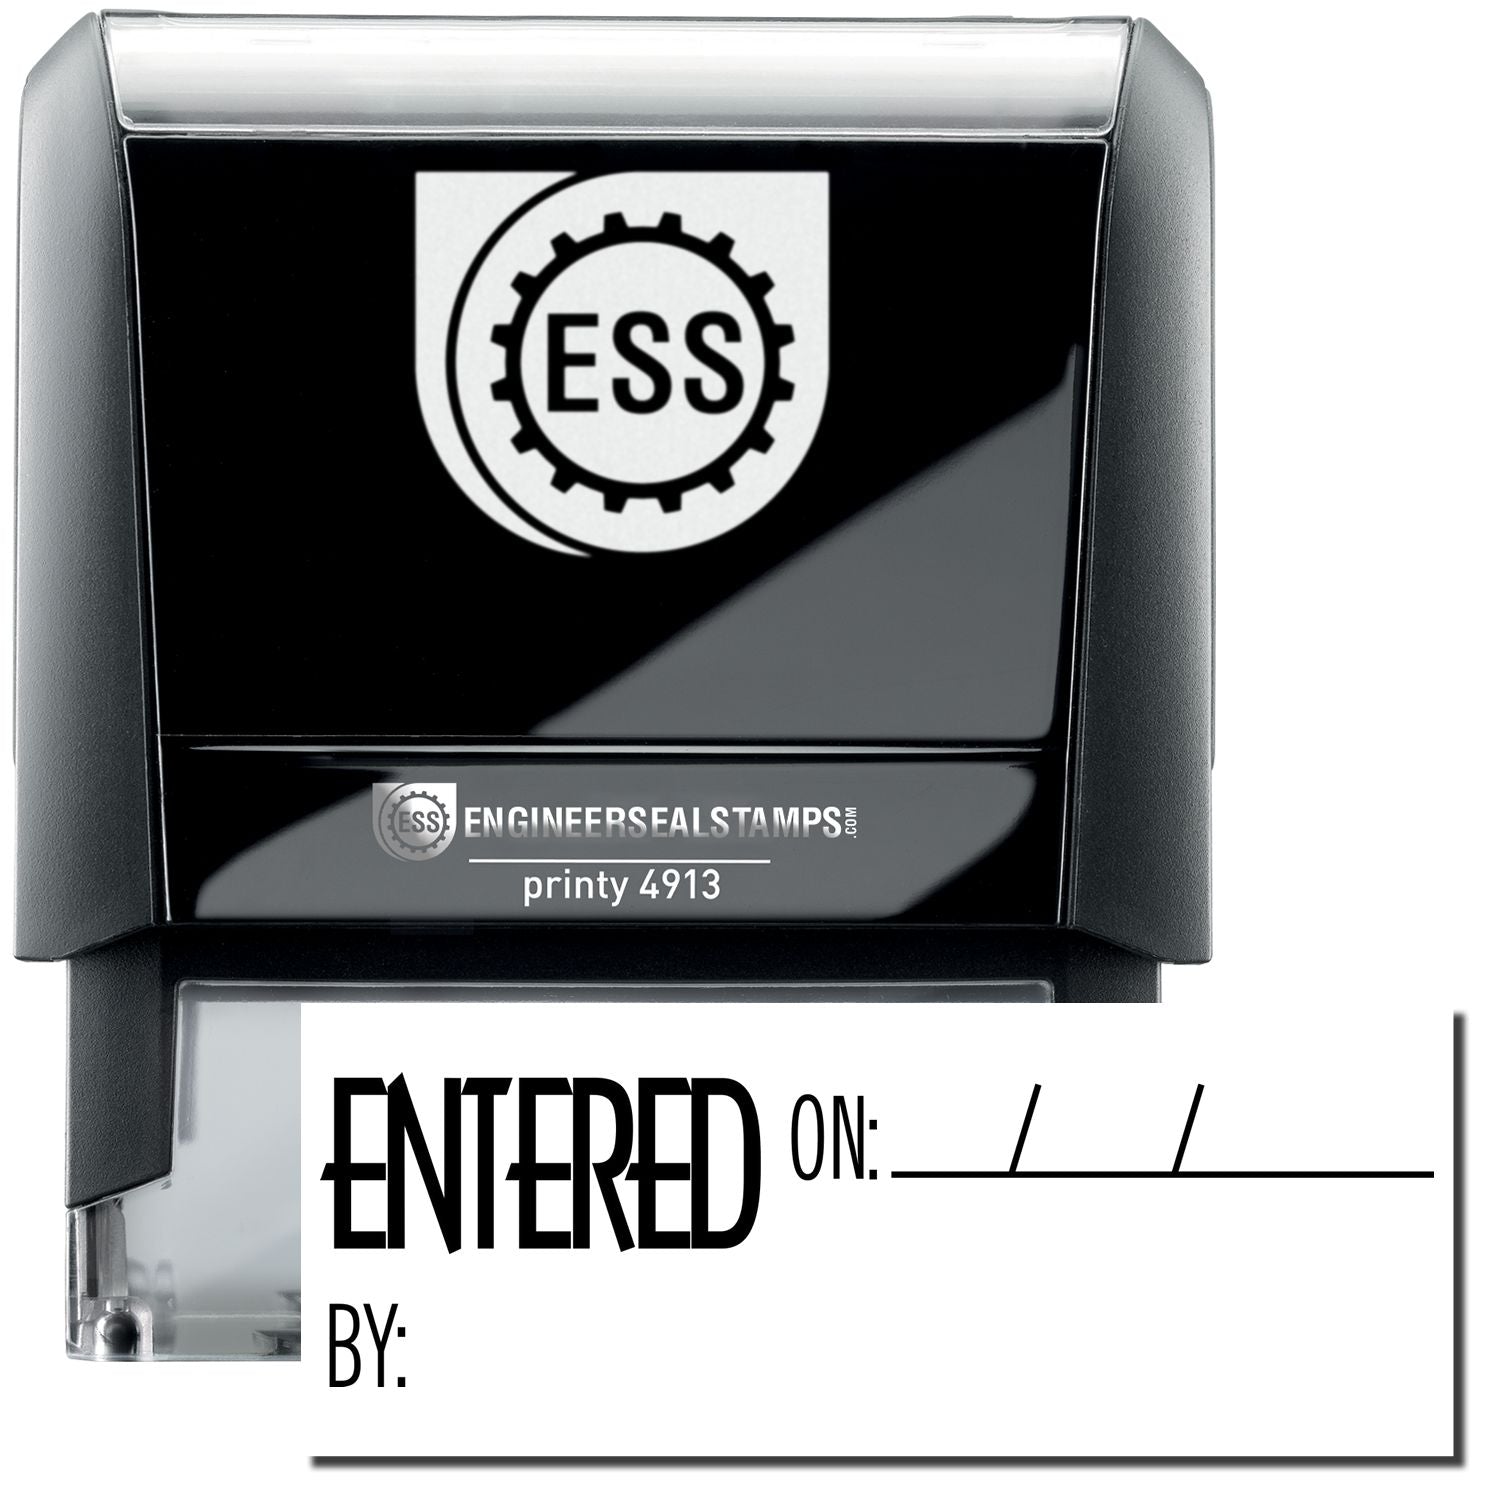 A self-inking stamp with a stamped image showing how the text "ENTERED ON" with space for mentioning a date and the name of the person who did the work is displayed by it after stamping.